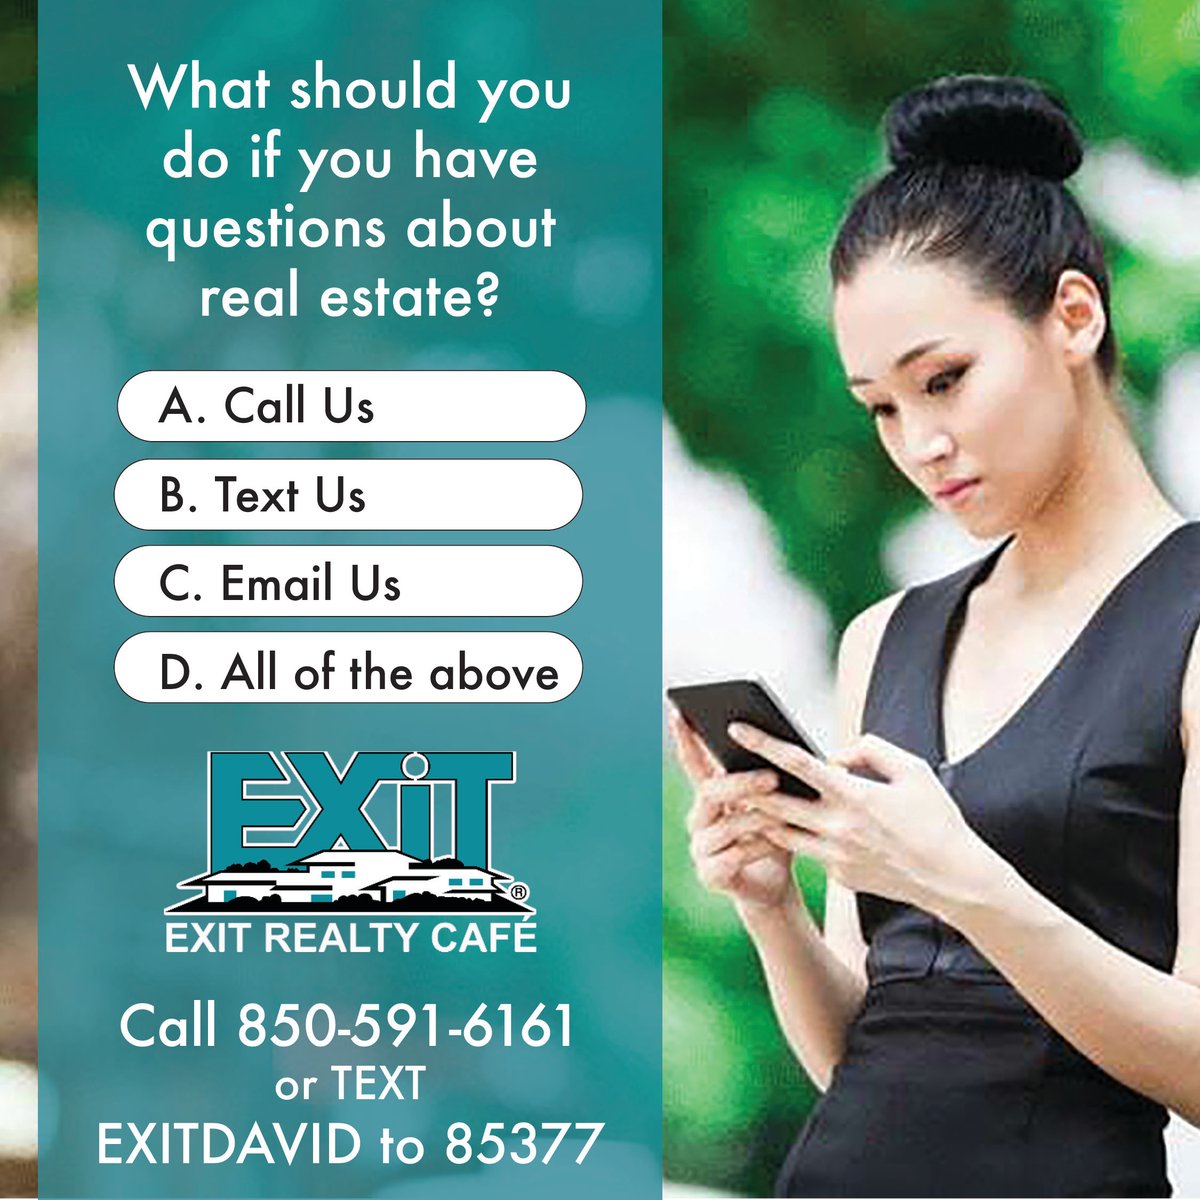 Questions about real estate?
We've got answers!

#EXITCAFE #JOINEXIT #realty #RealEstate #EXITRealty #excellence #change #growth #support #success #bestinclass #advertising #marketing #differentiator #passiveincome #financialfreedom #realestatecareers